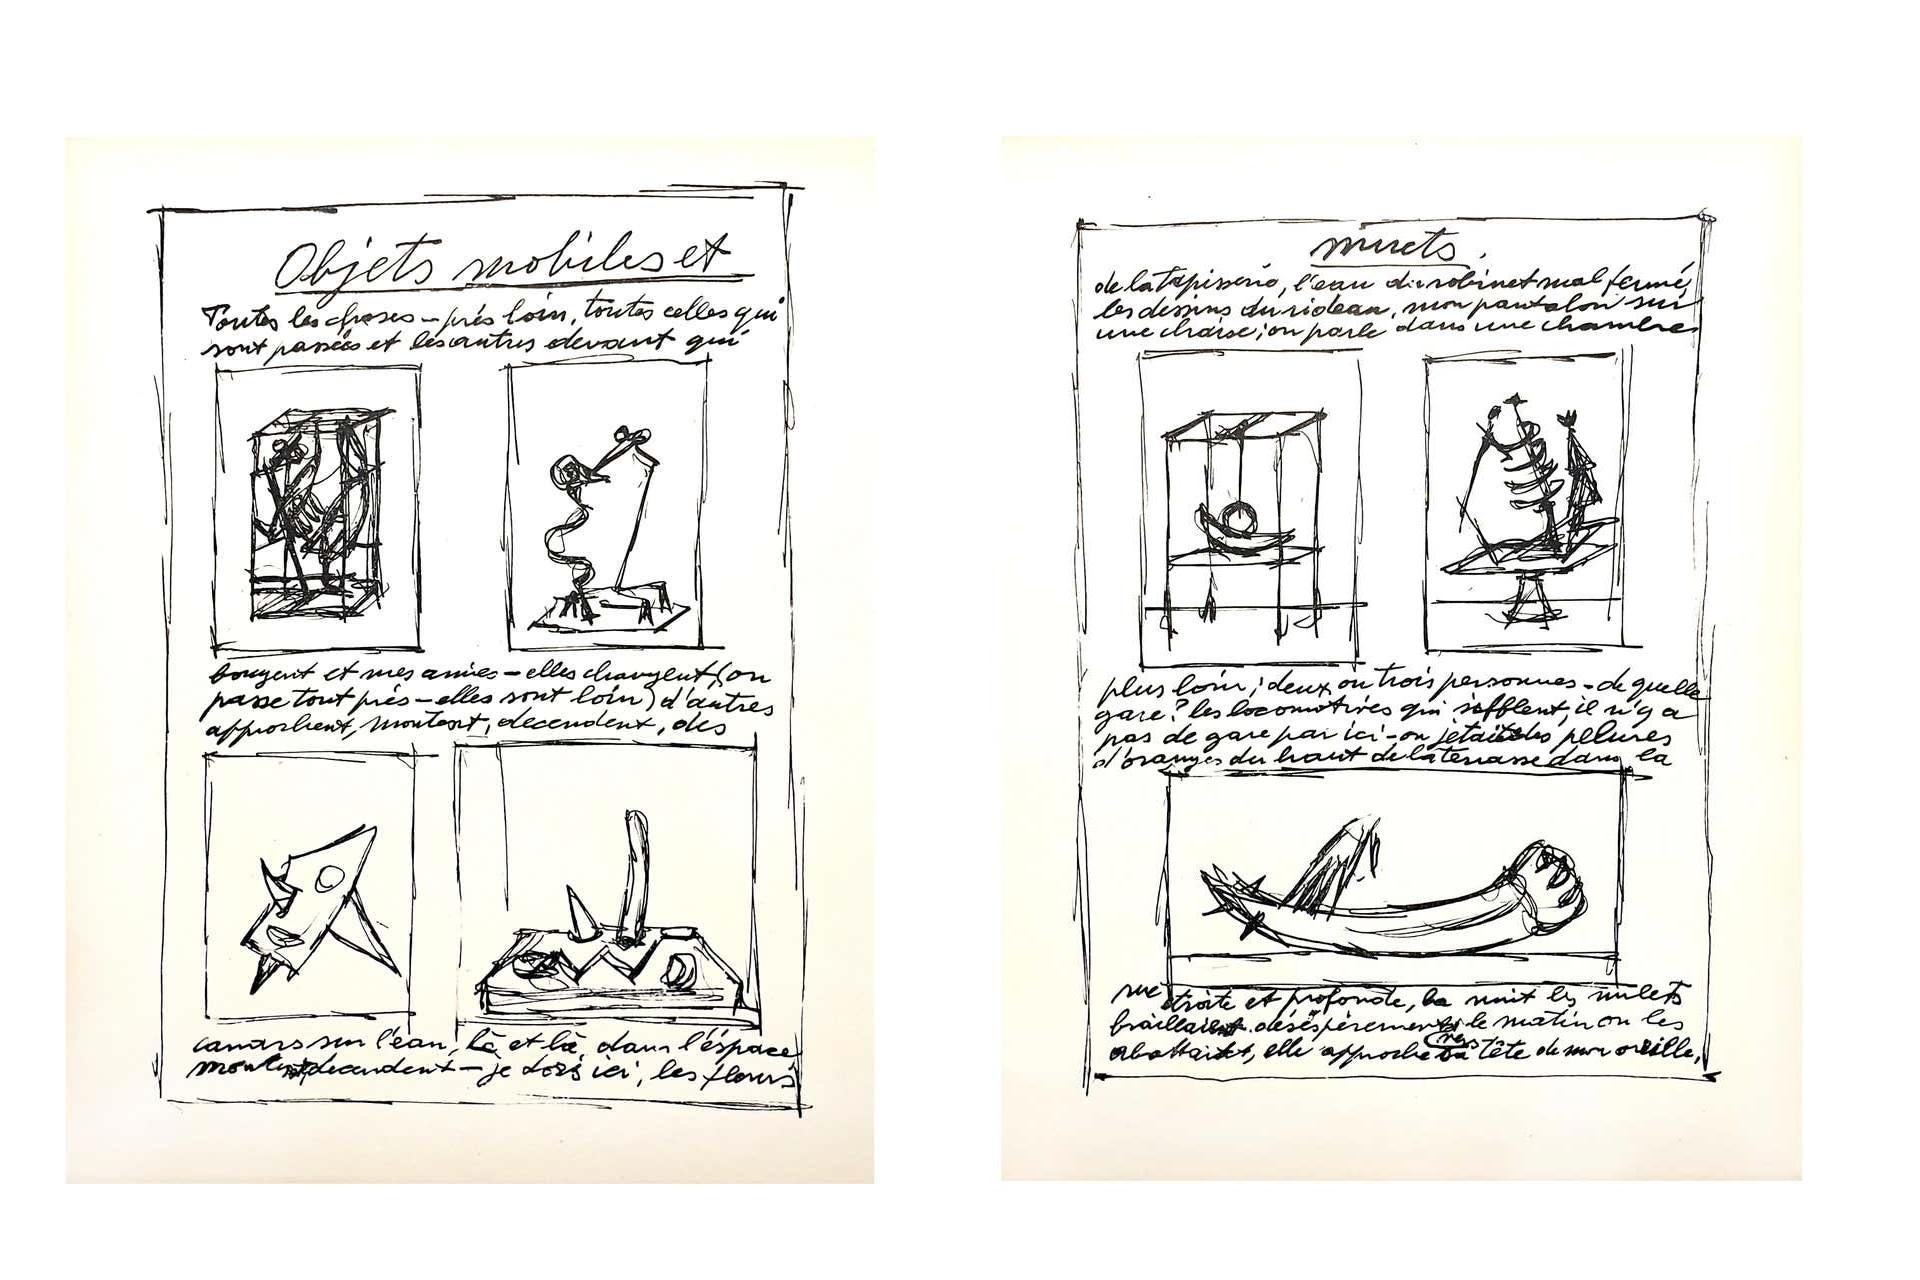 Alberto Giacometti Original Lithographs
Published in the deluxe art review, XXe Siecle
1952
Dimensions: each 32 x 24 cm 
Publisher: G. di San Lazzaro.
Unsigned and unumbered as issued